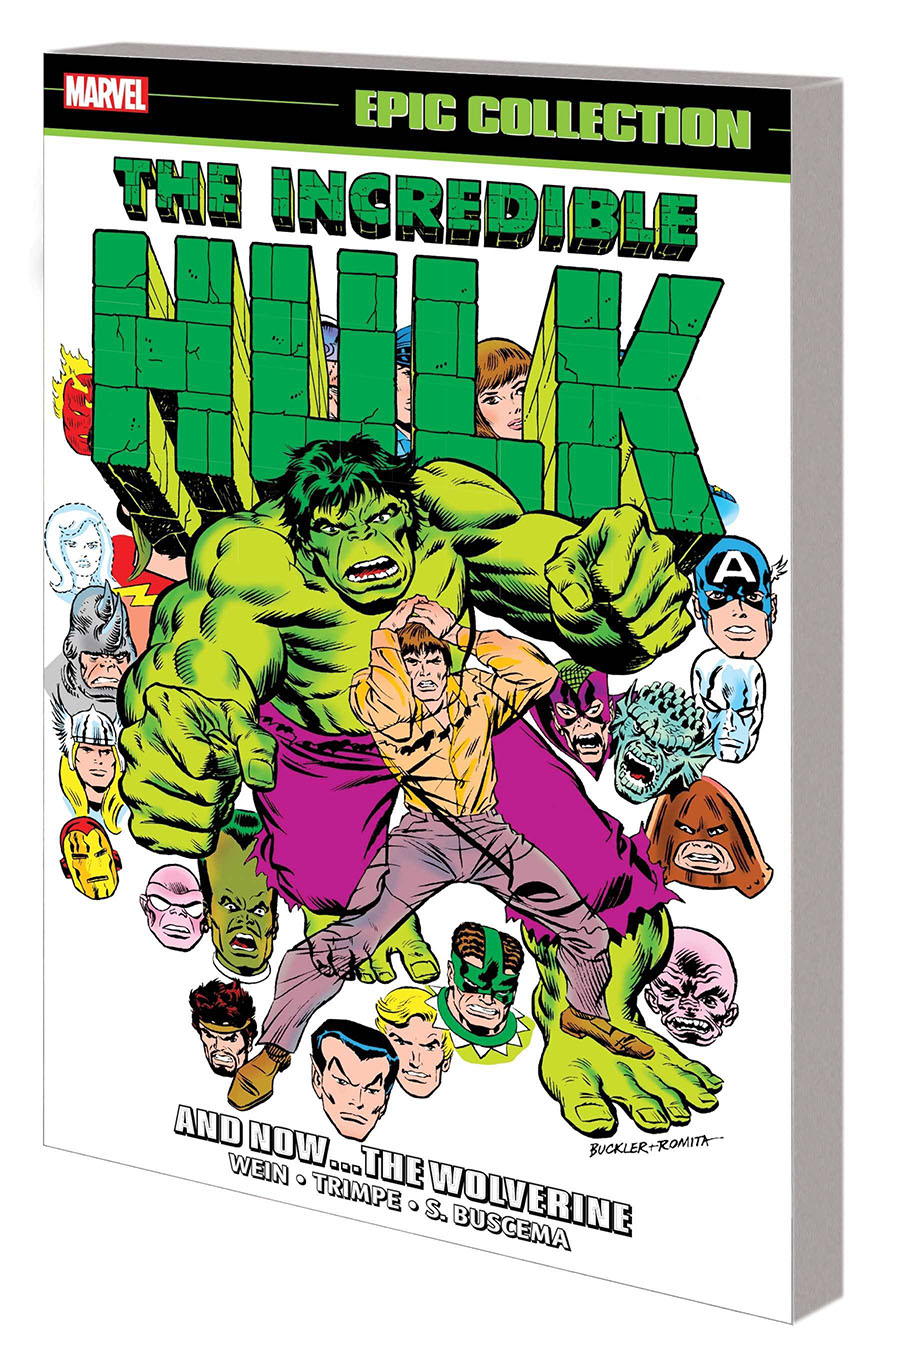 Incredible Hulk Epic Collection Vol 7 And Now The Wolverine TP